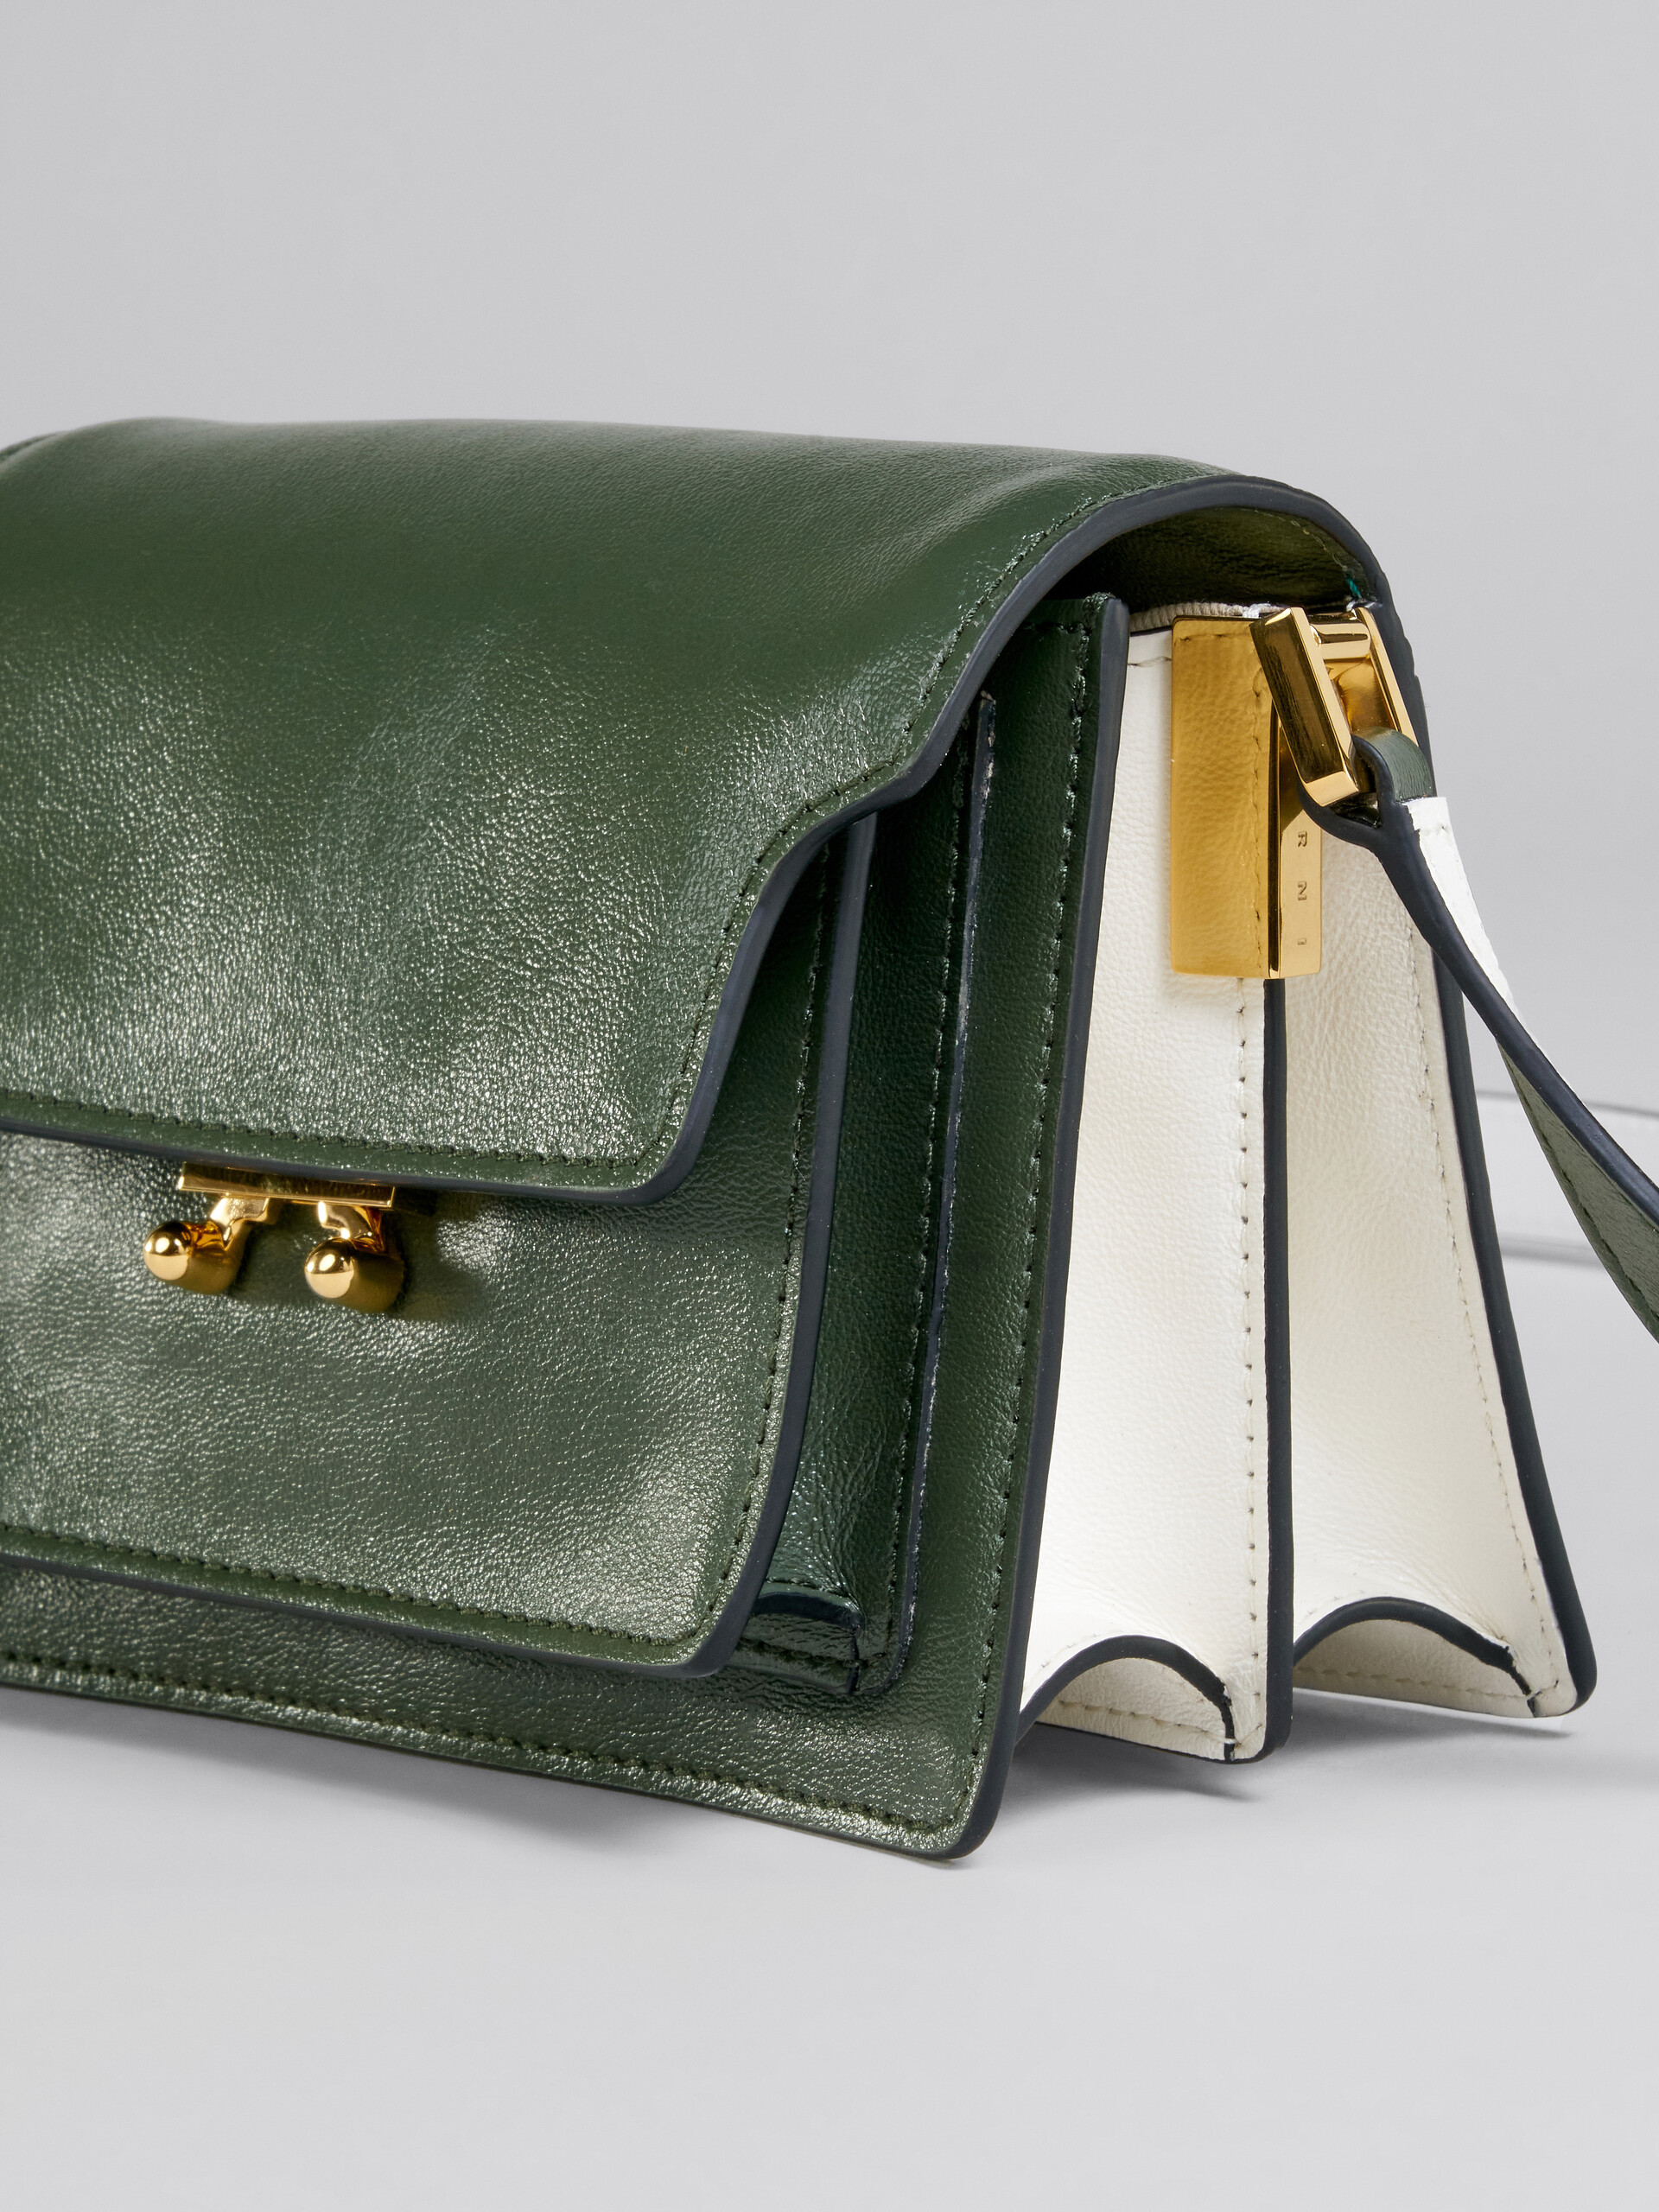 Trunk Soft Mini Bag in green and white leather - Shoulder Bag - Image 5